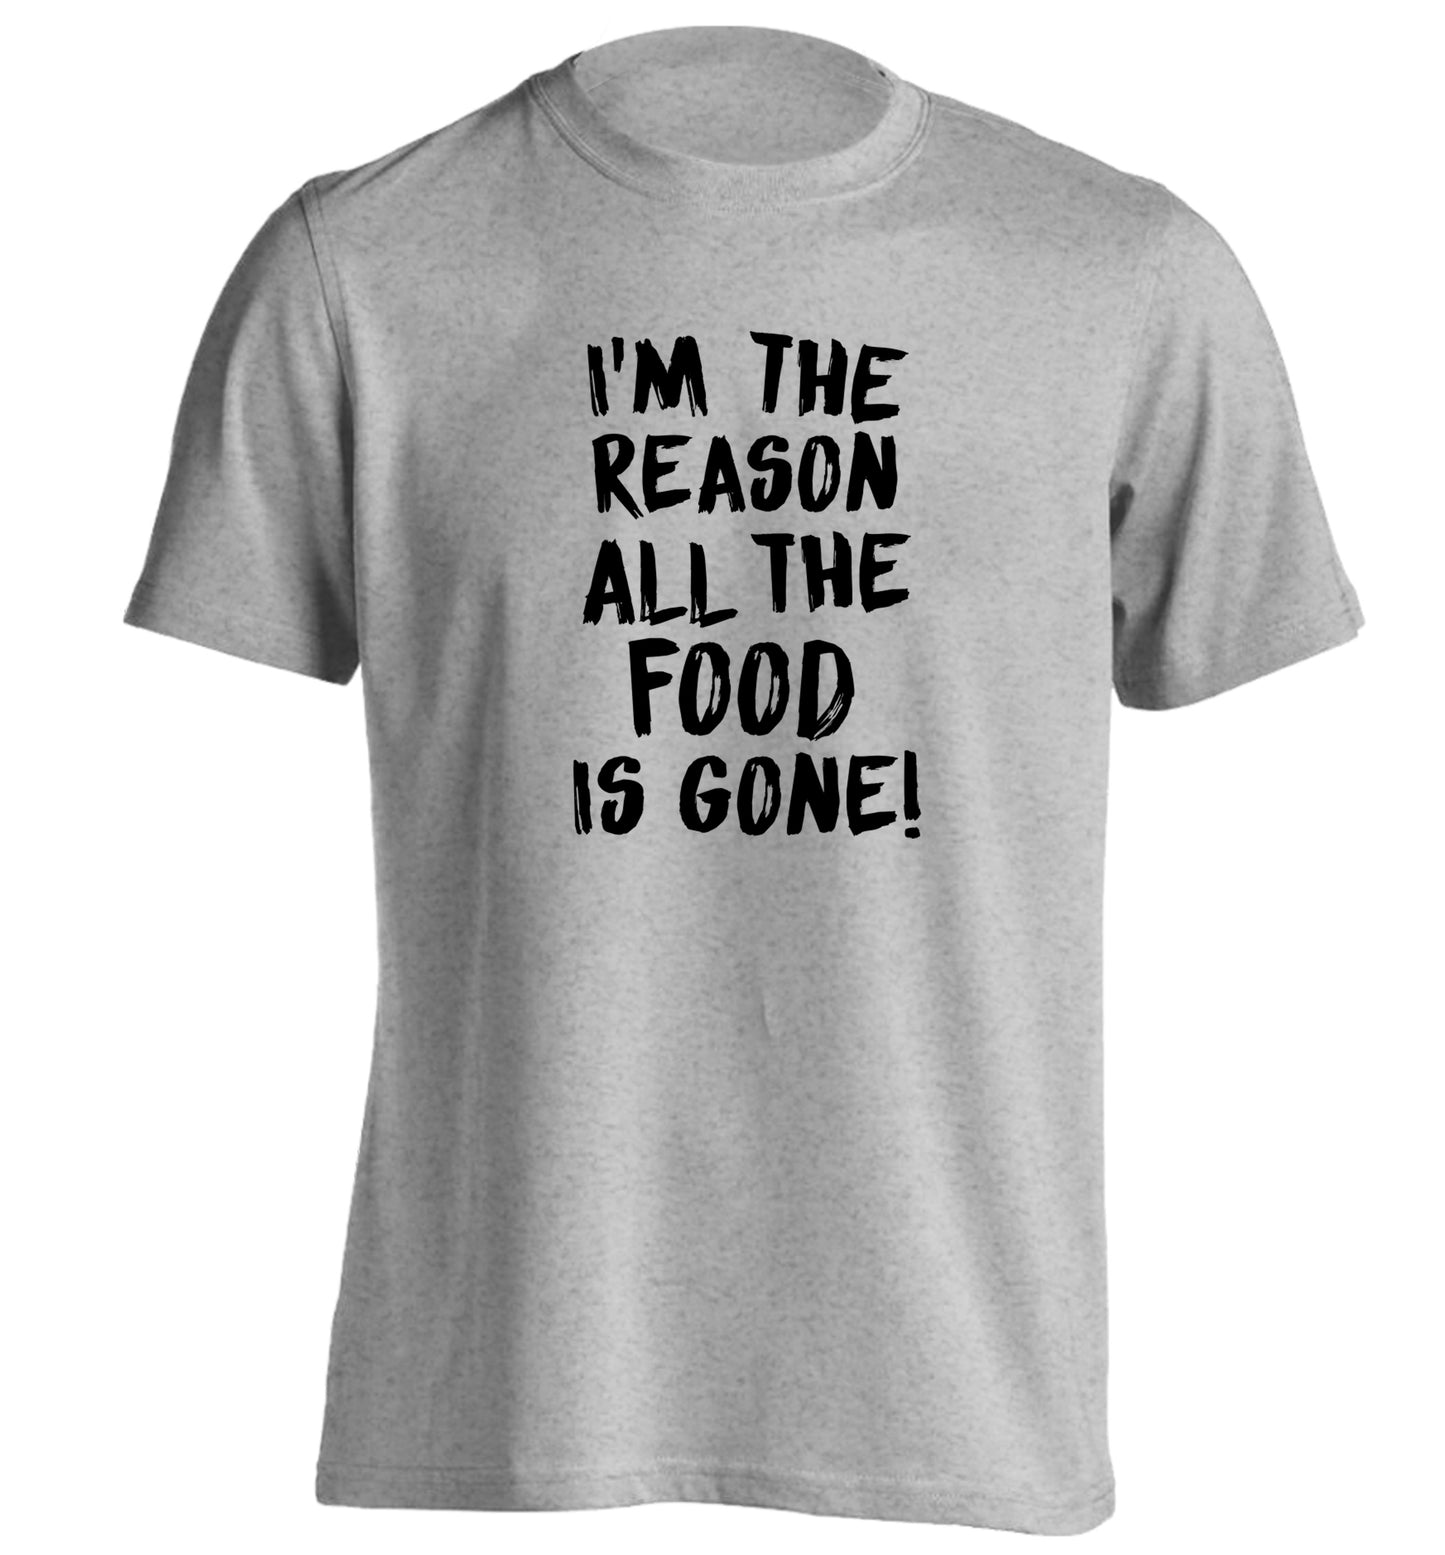 I'm the reason why all the food is gone adults unisex grey Tshirt 2XL